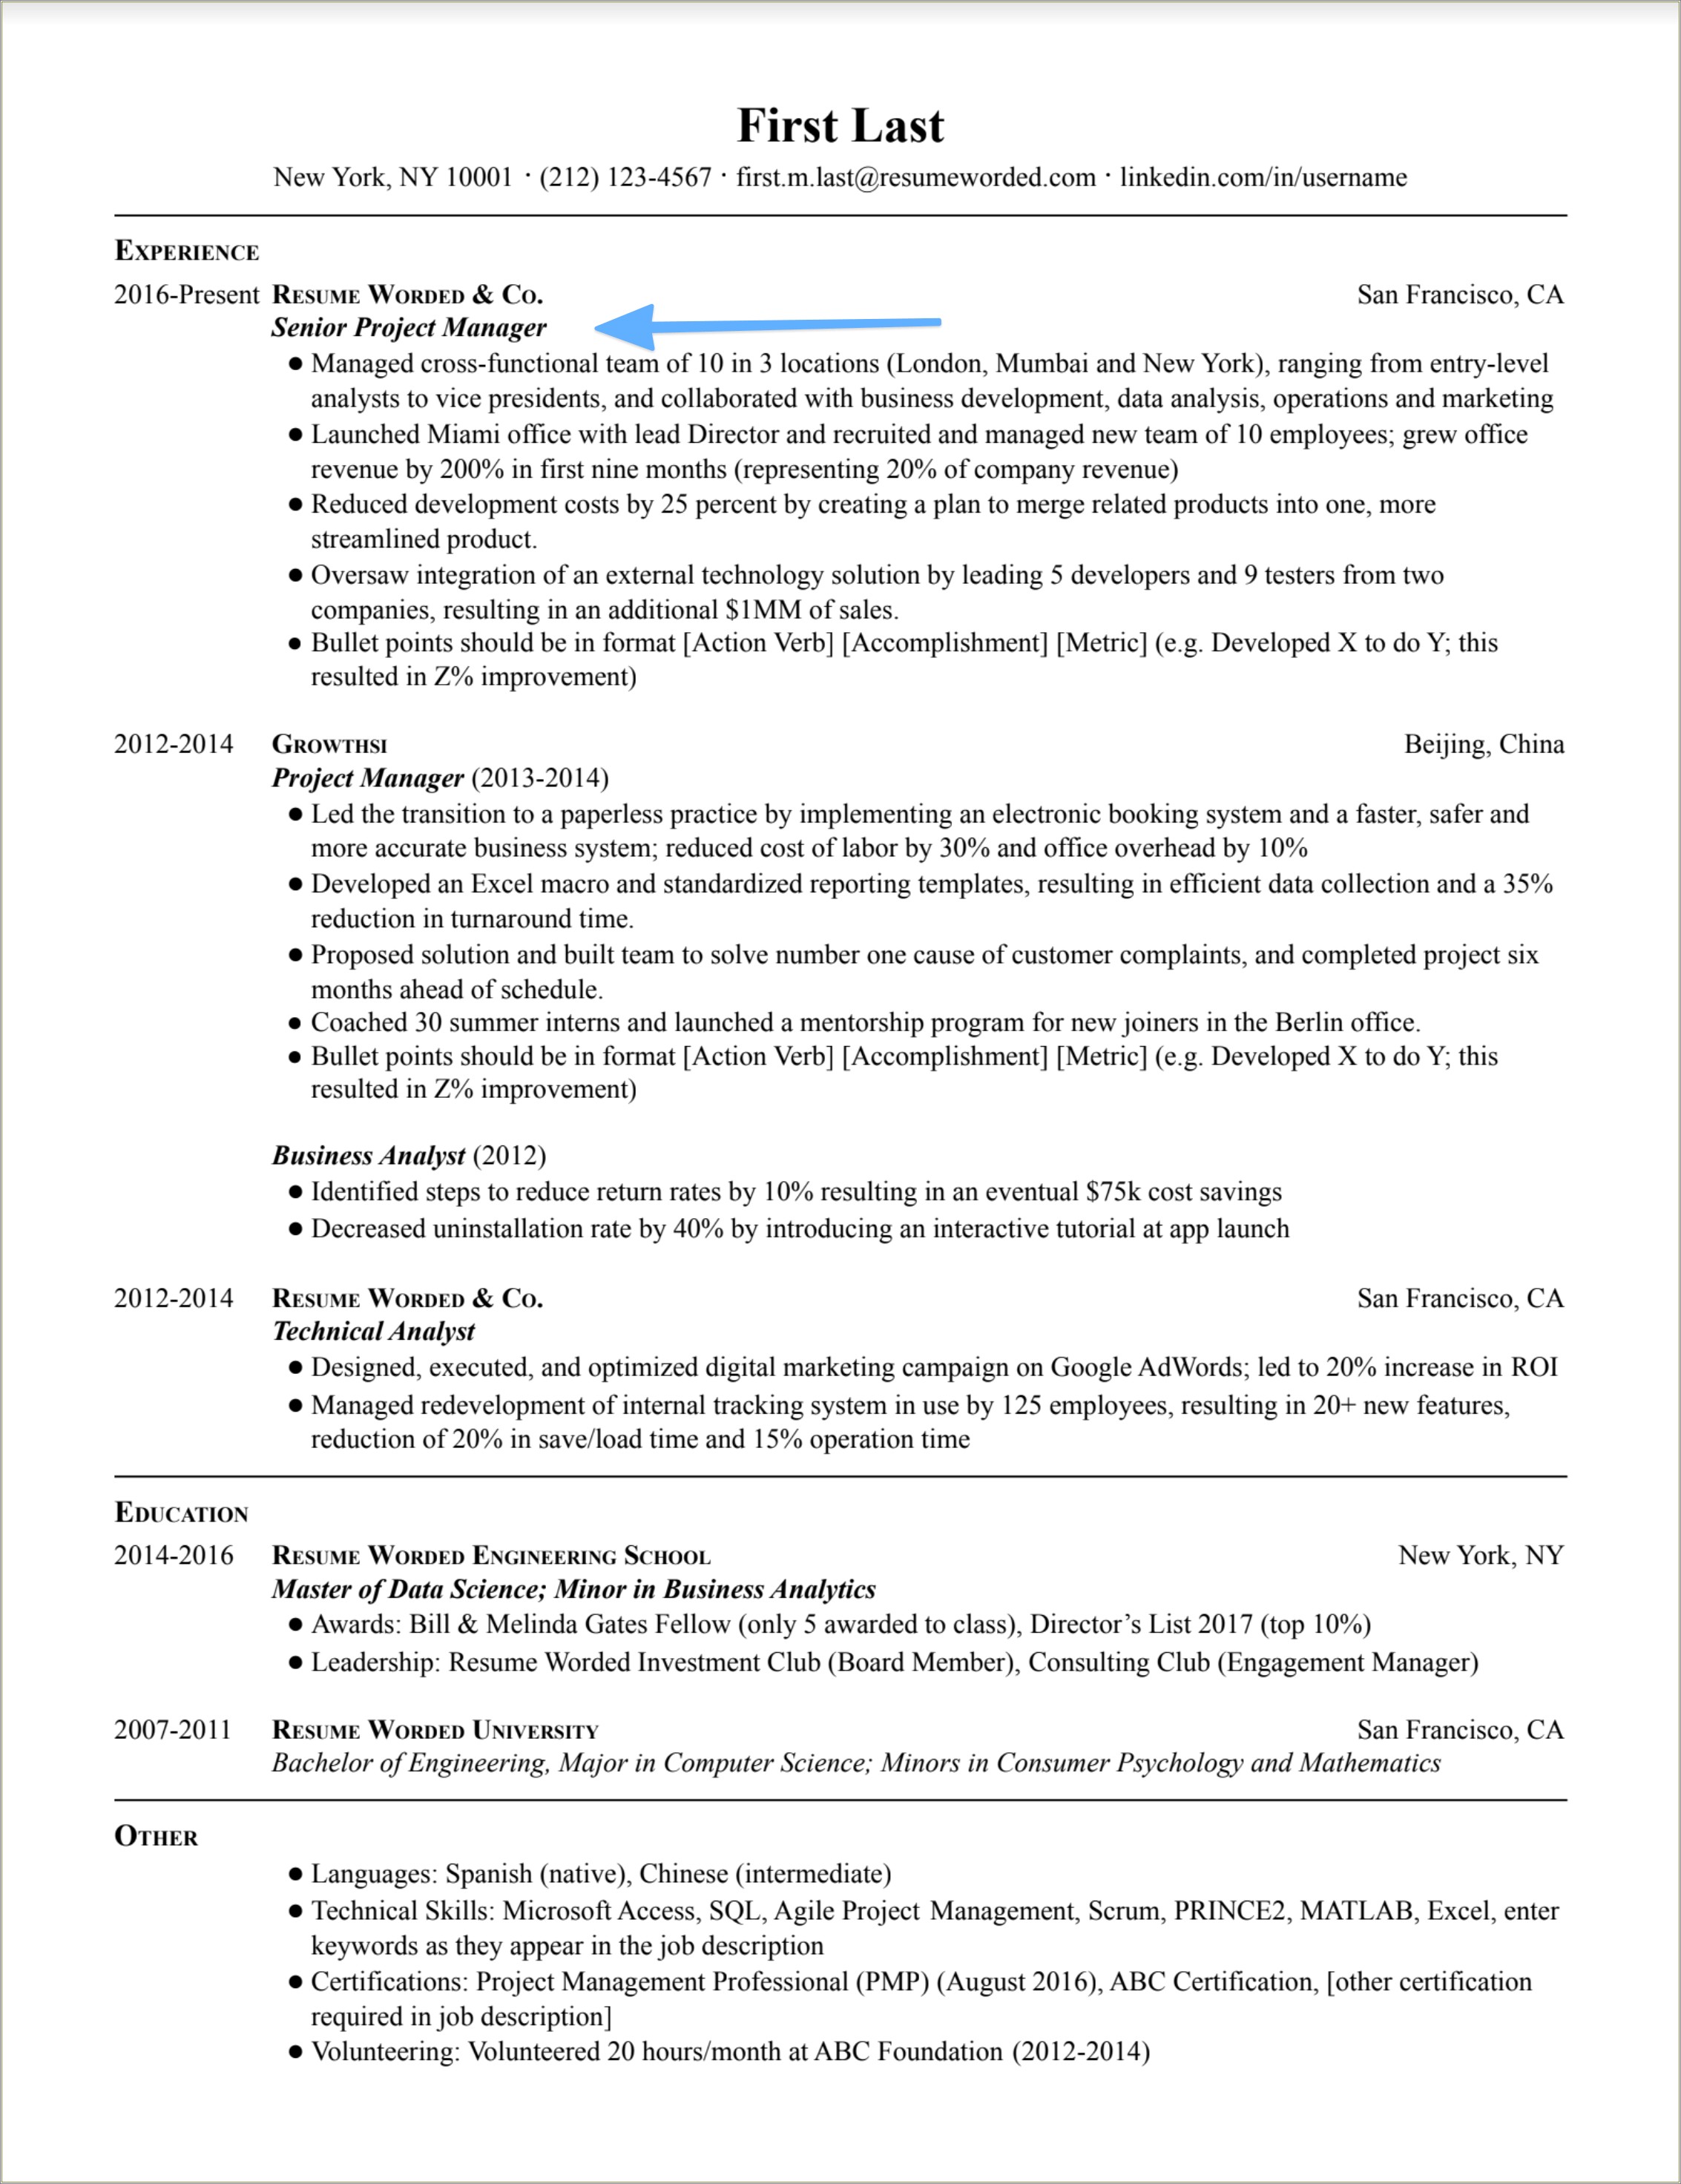 construction-project-manager-resume-template-microsoft-word-resume